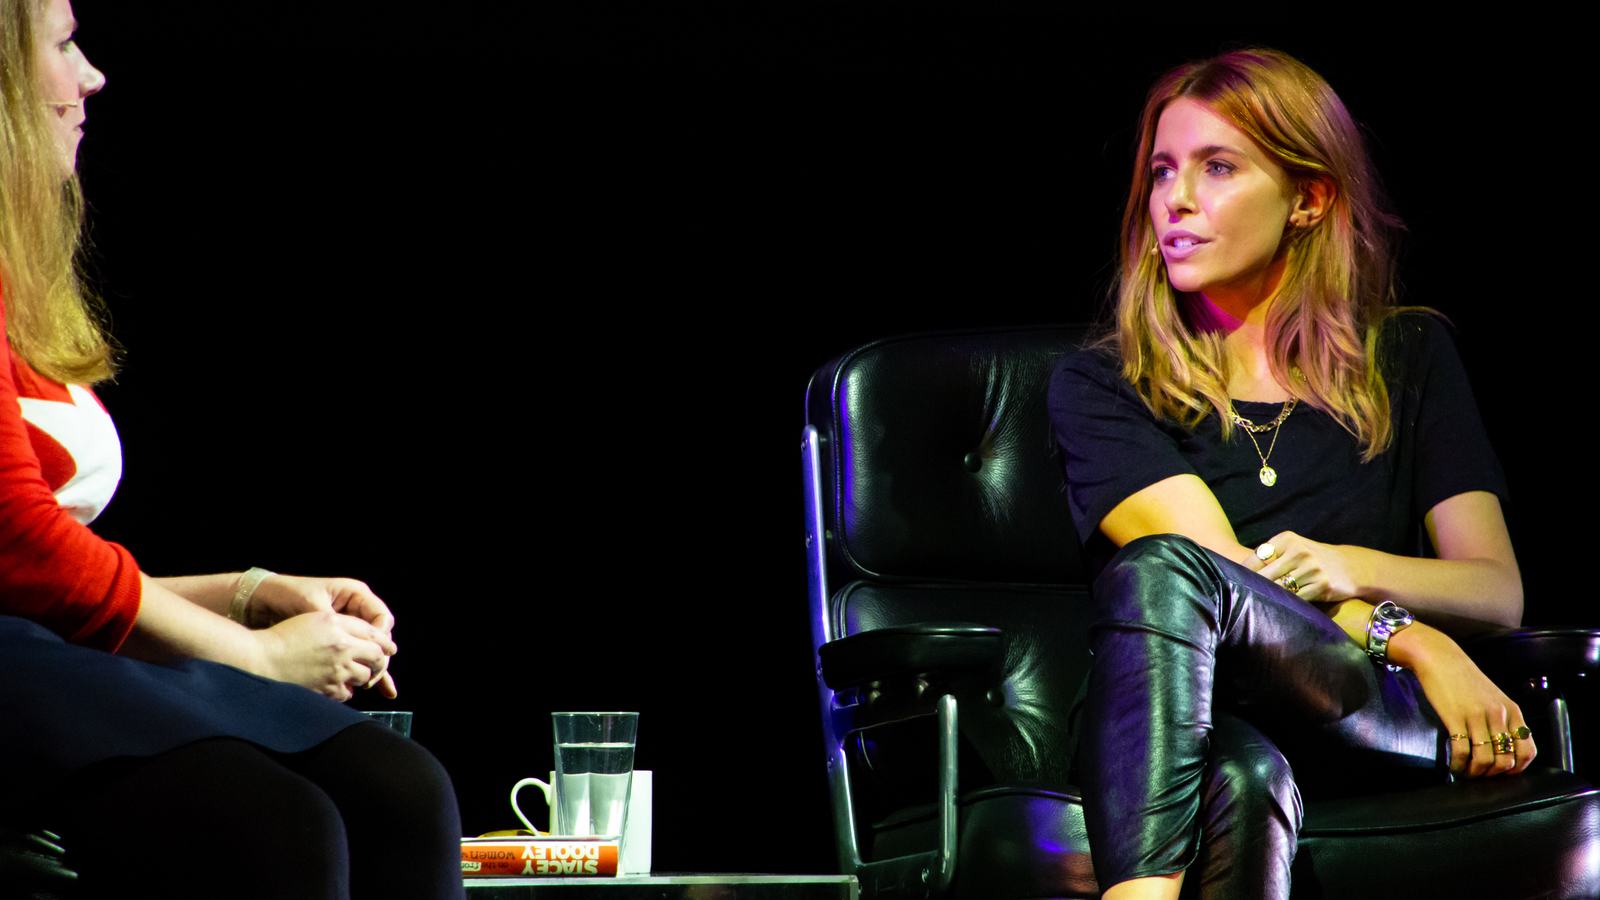 Stacey Dooley, documentary filmmaker and author